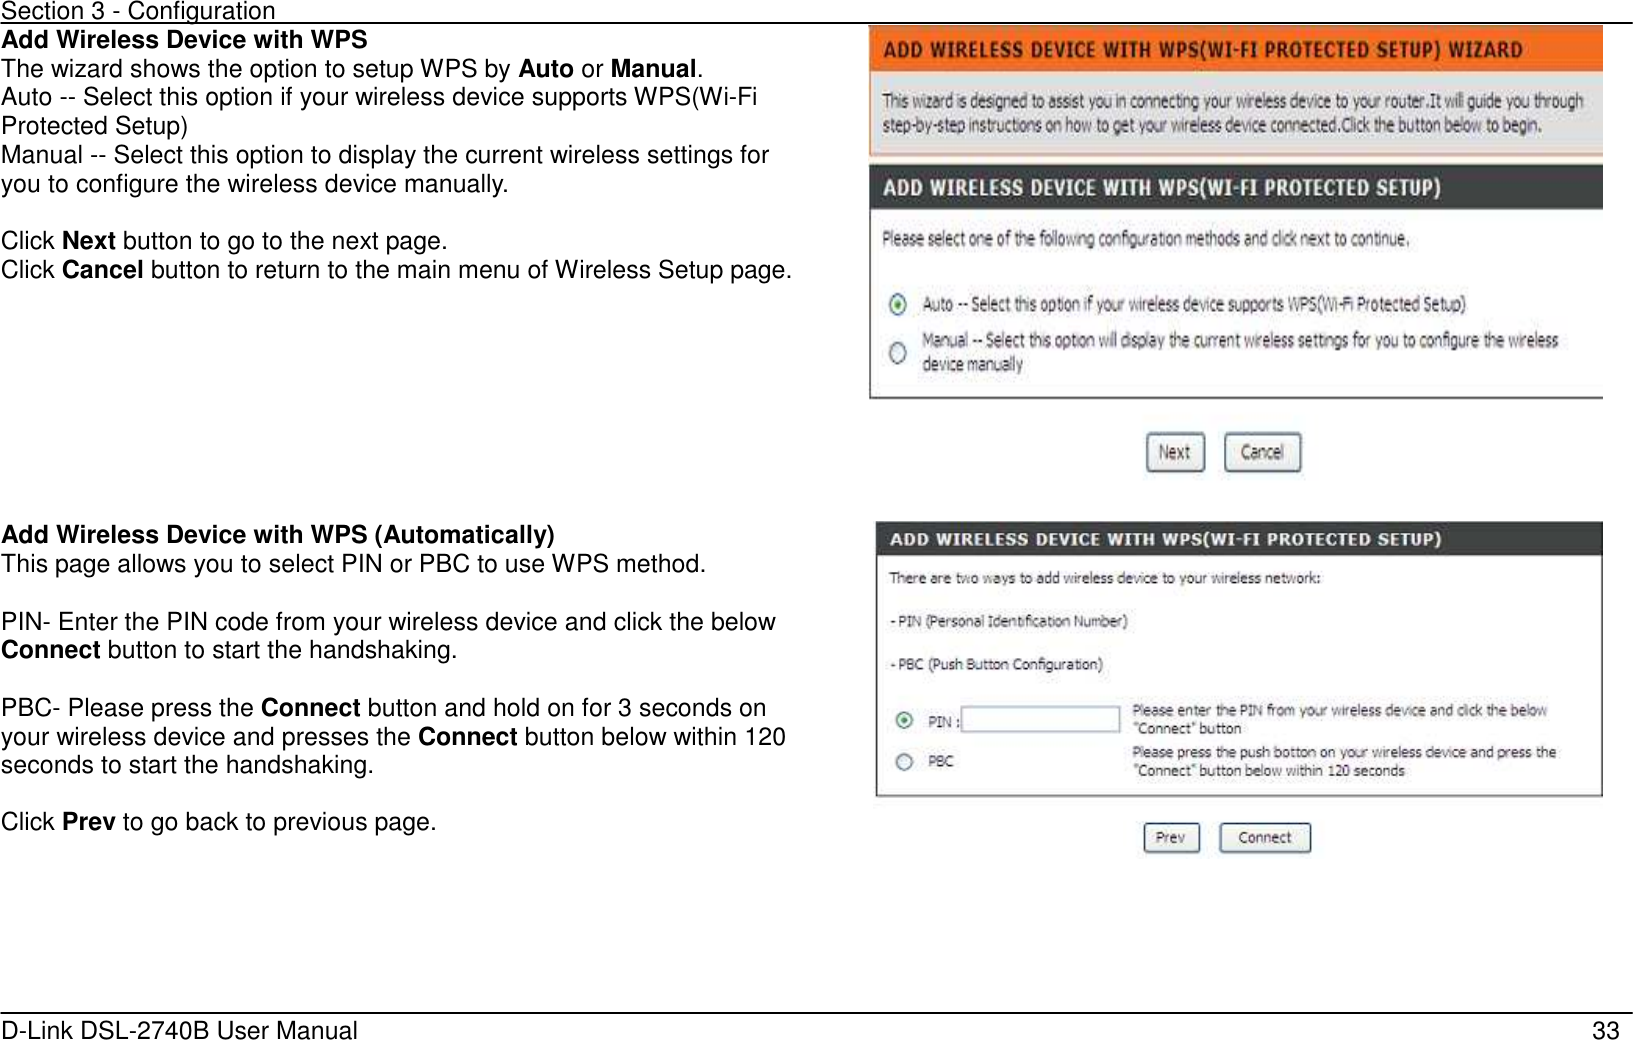 Section 3 - Configuration   D-Link DSL-2740B User Manual                                                  33 Add Wireless Device with WPS The wizard shows the option to setup WPS by Auto or Manual. Auto -- Select this option if your wireless device supports WPS(Wi-Fi Protected Setup) Manual -- Select this option to display the current wireless settings for you to configure the wireless device manually.  Click Next button to go to the next page. Click Cancel button to return to the main menu of Wireless Setup page.    Add Wireless Device with WPS (Automatically) This page allows you to select PIN or PBC to use WPS method.  PIN- Enter the PIN code from your wireless device and click the below Connect button to start the handshaking.  PBC- Please press the Connect button and hold on for 3 seconds on your wireless device and presses the Connect button below within 120 seconds to start the handshaking.  Click Prev to go back to previous page.     